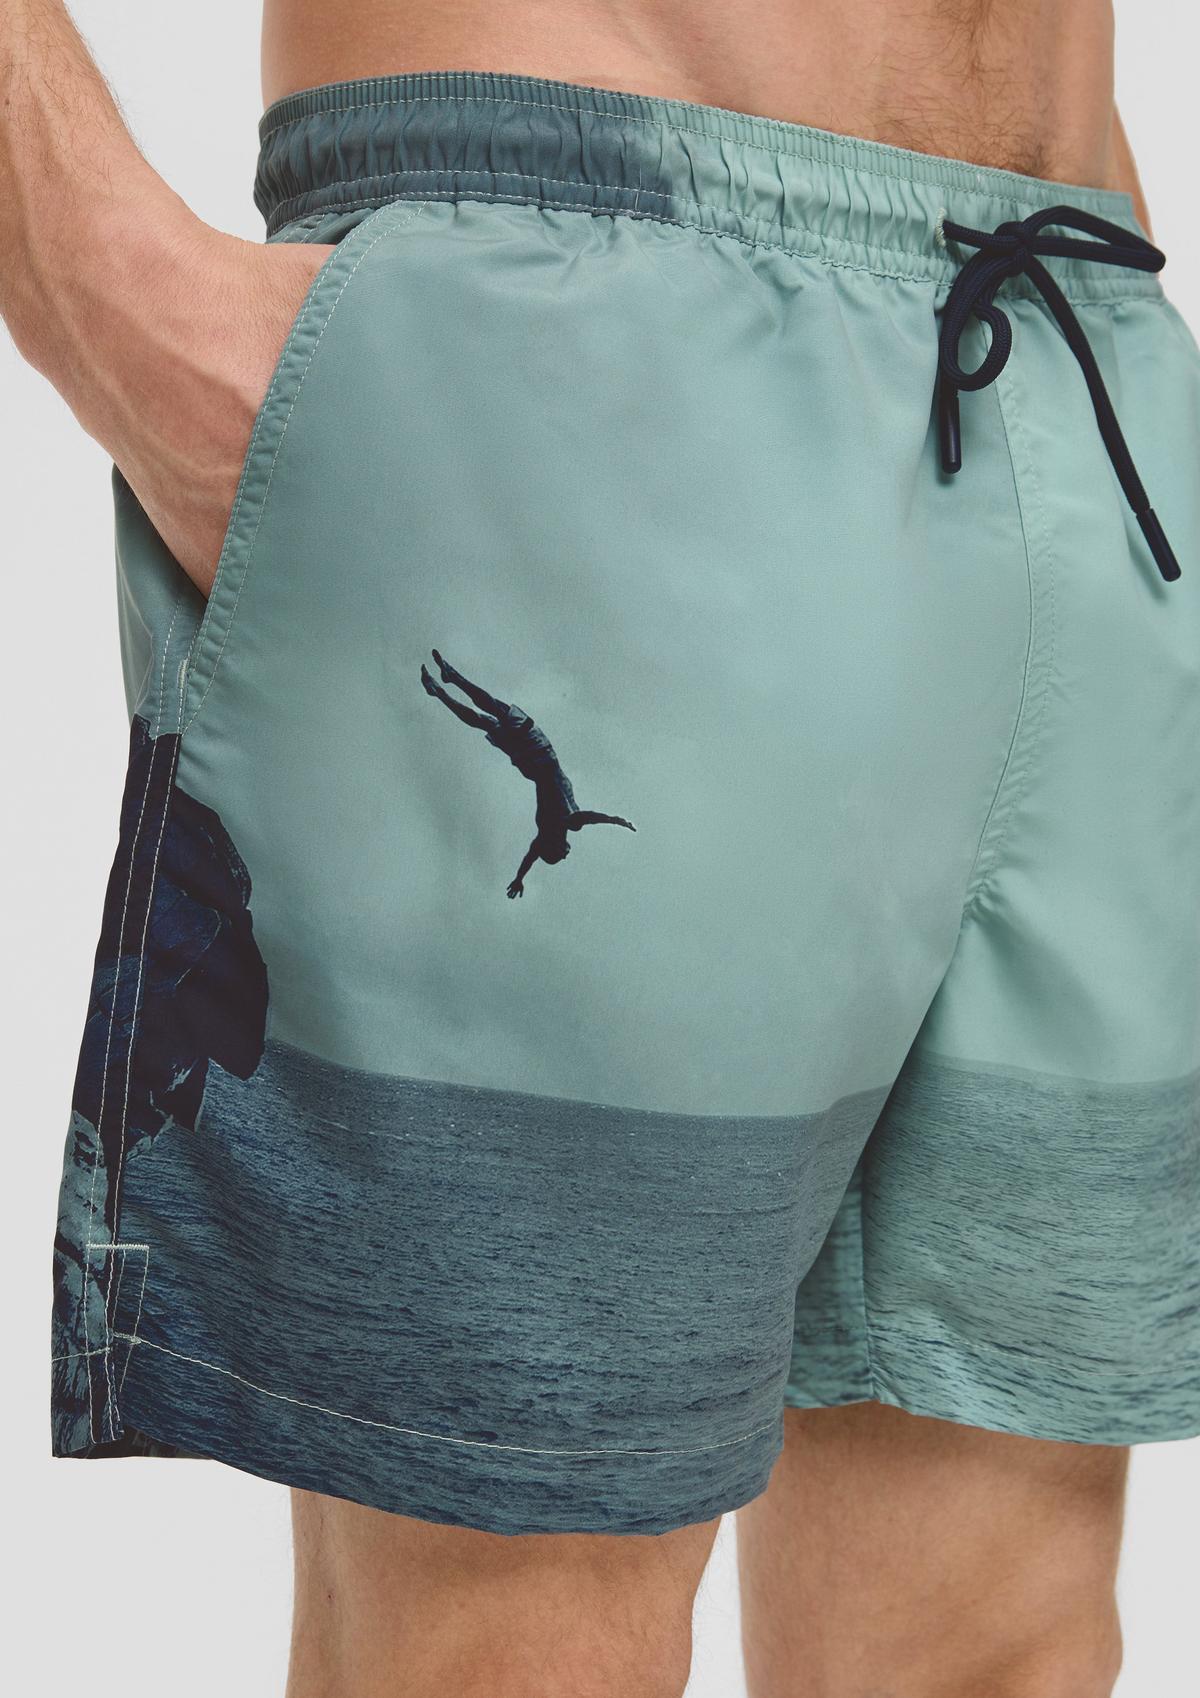 s.Oliver Badeshorts mit All-over-Print